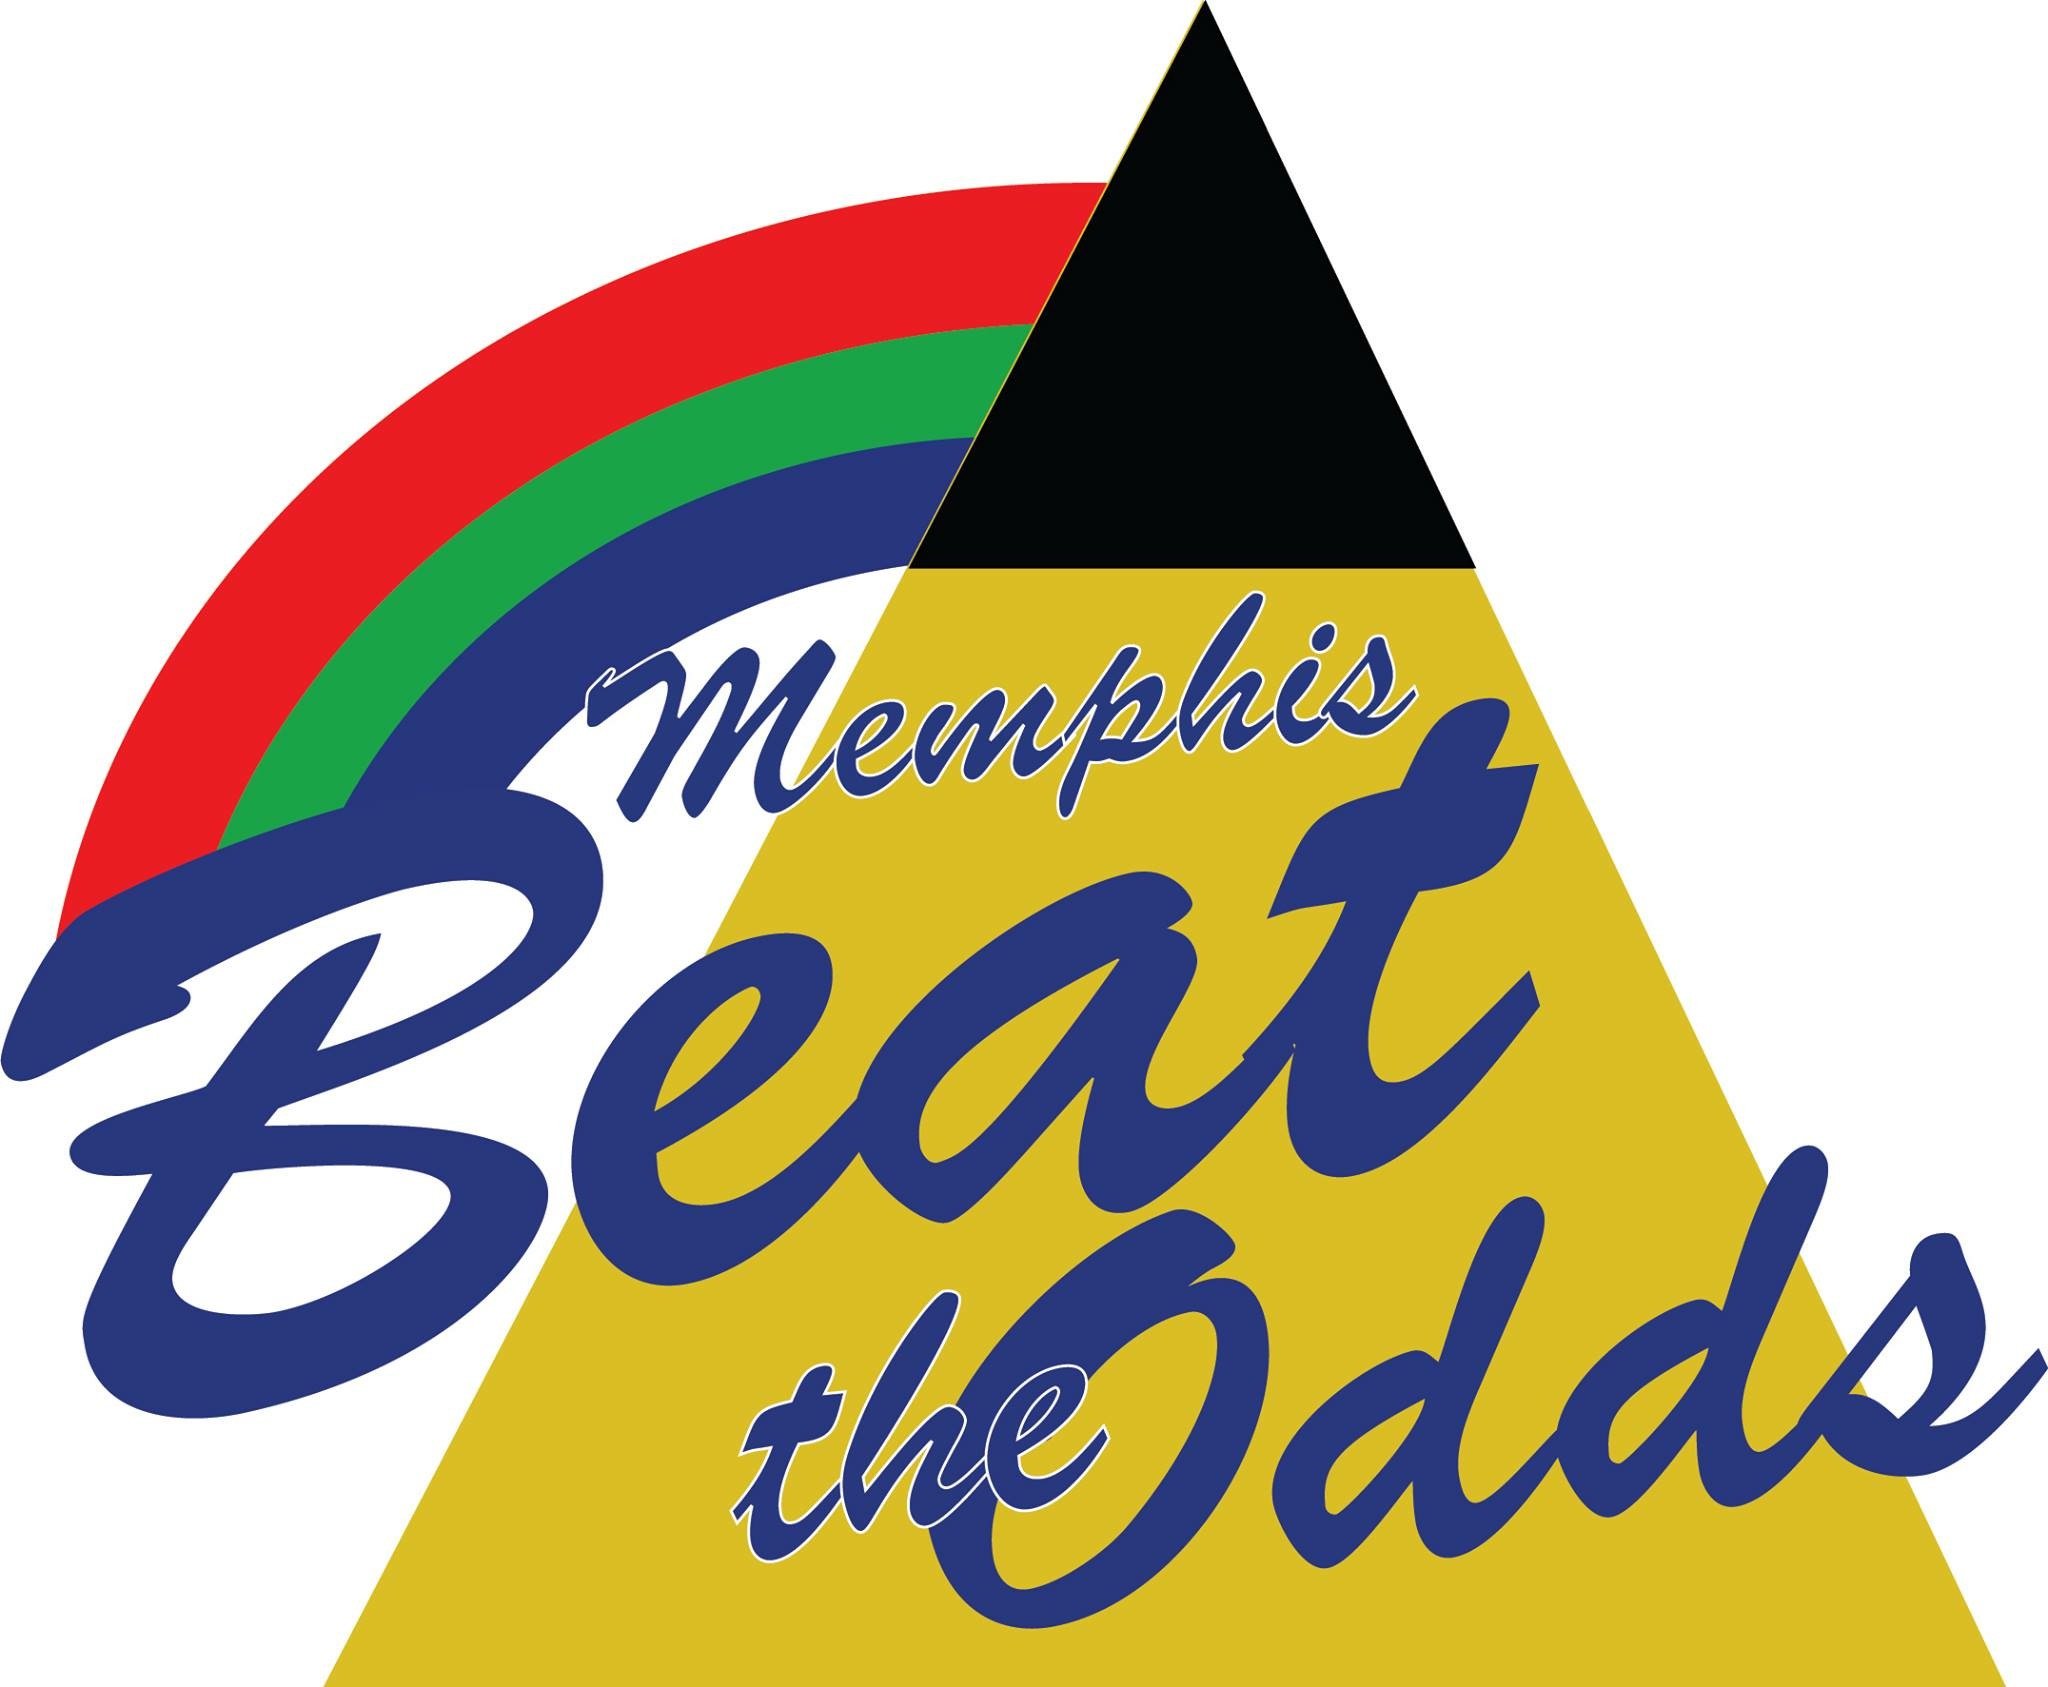 Memphis “Beat the Odds” (MBTO) recognizes and honors young people who have overcome tremendous obstacles to achieve and find success.